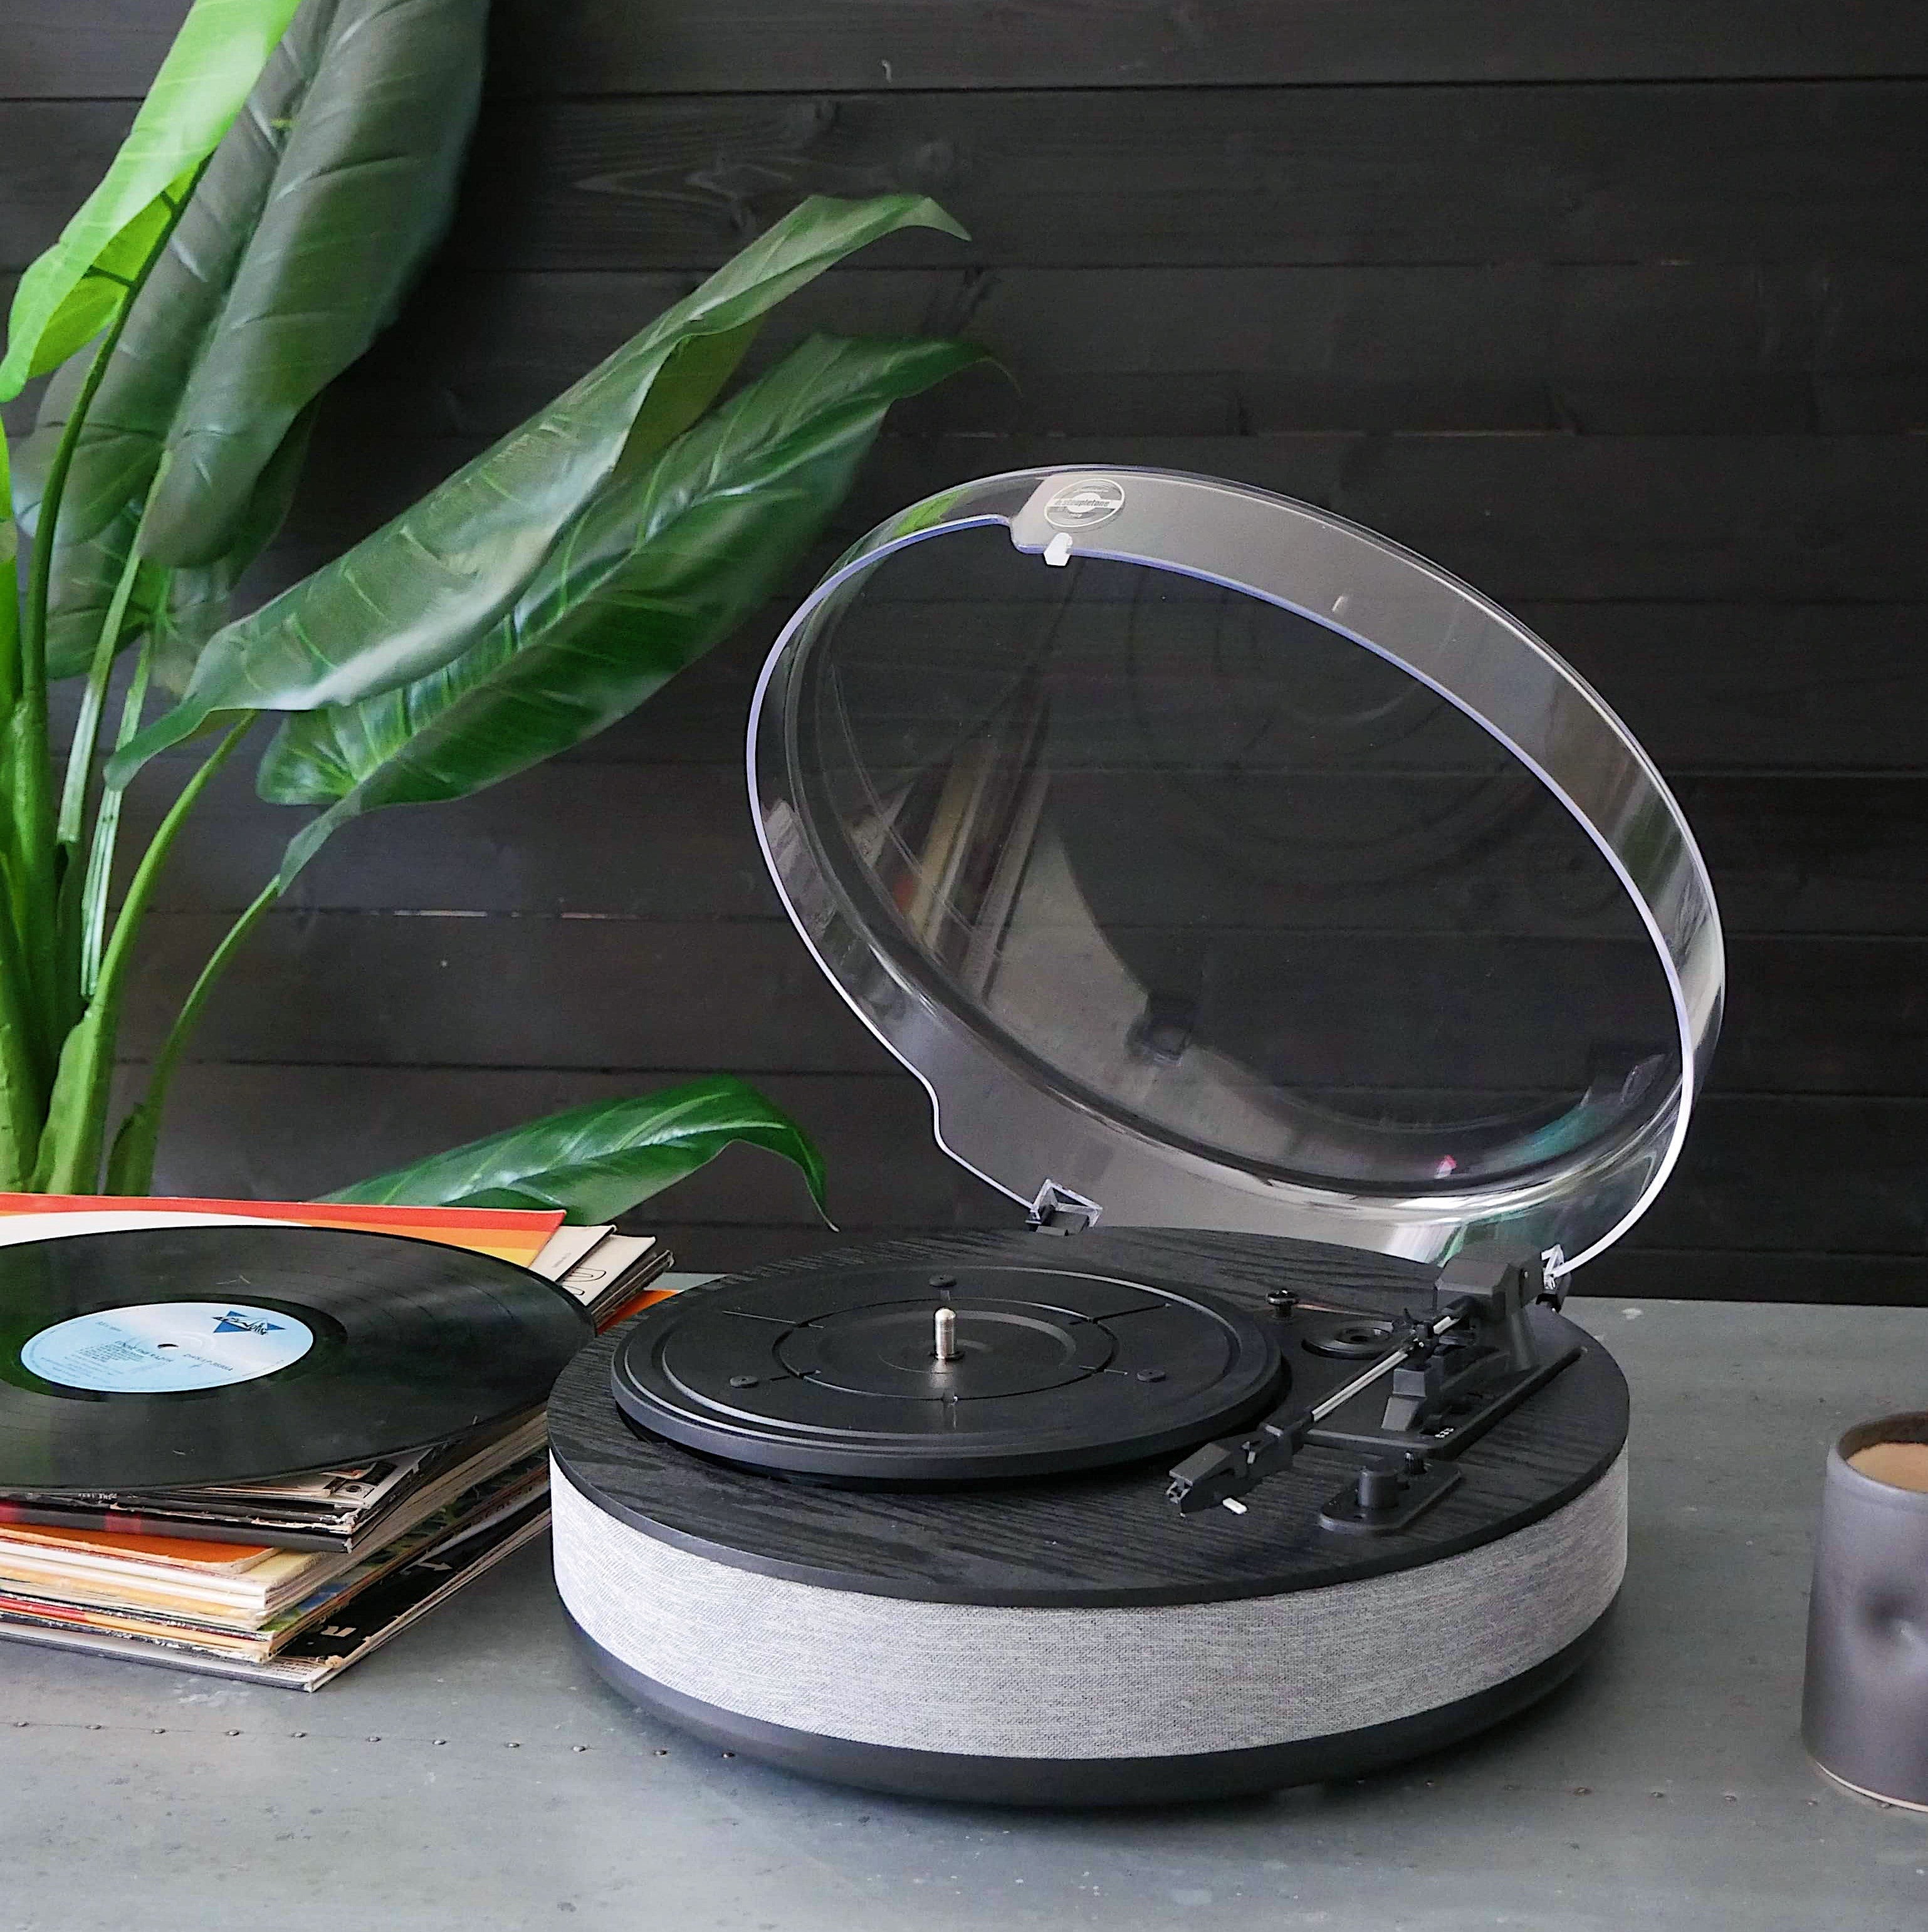 DISCGO -Bluetooth Streaming Round Record Player